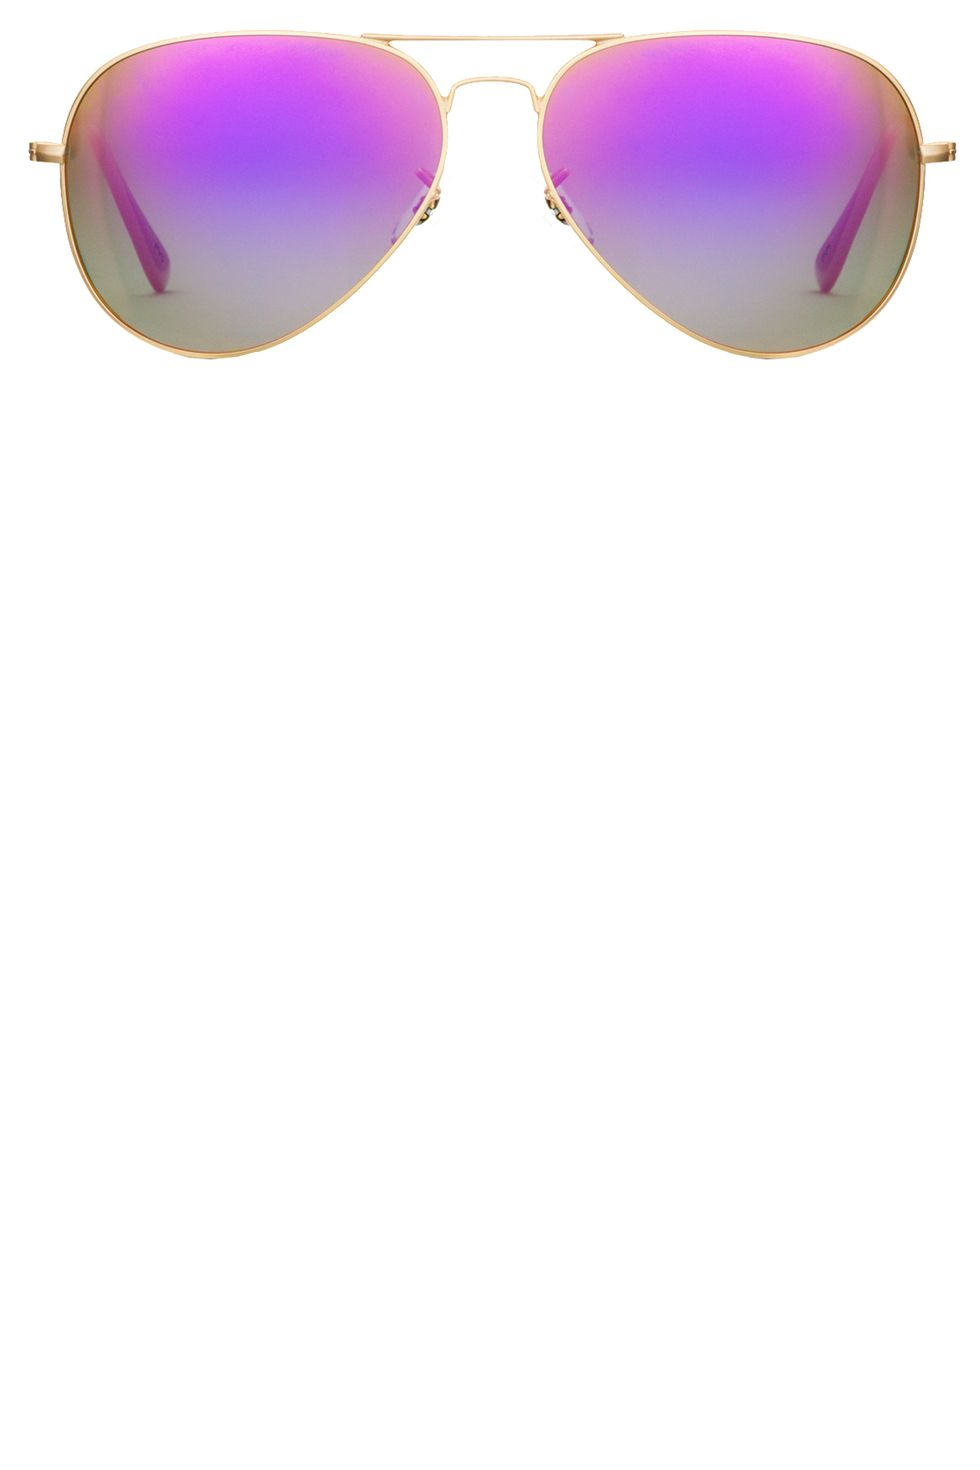 Eyewear, Vision care, Pink, Magenta, Purple, Violet, Colorfulness, Eye glass accessory, Lavender, Tints and shades, 